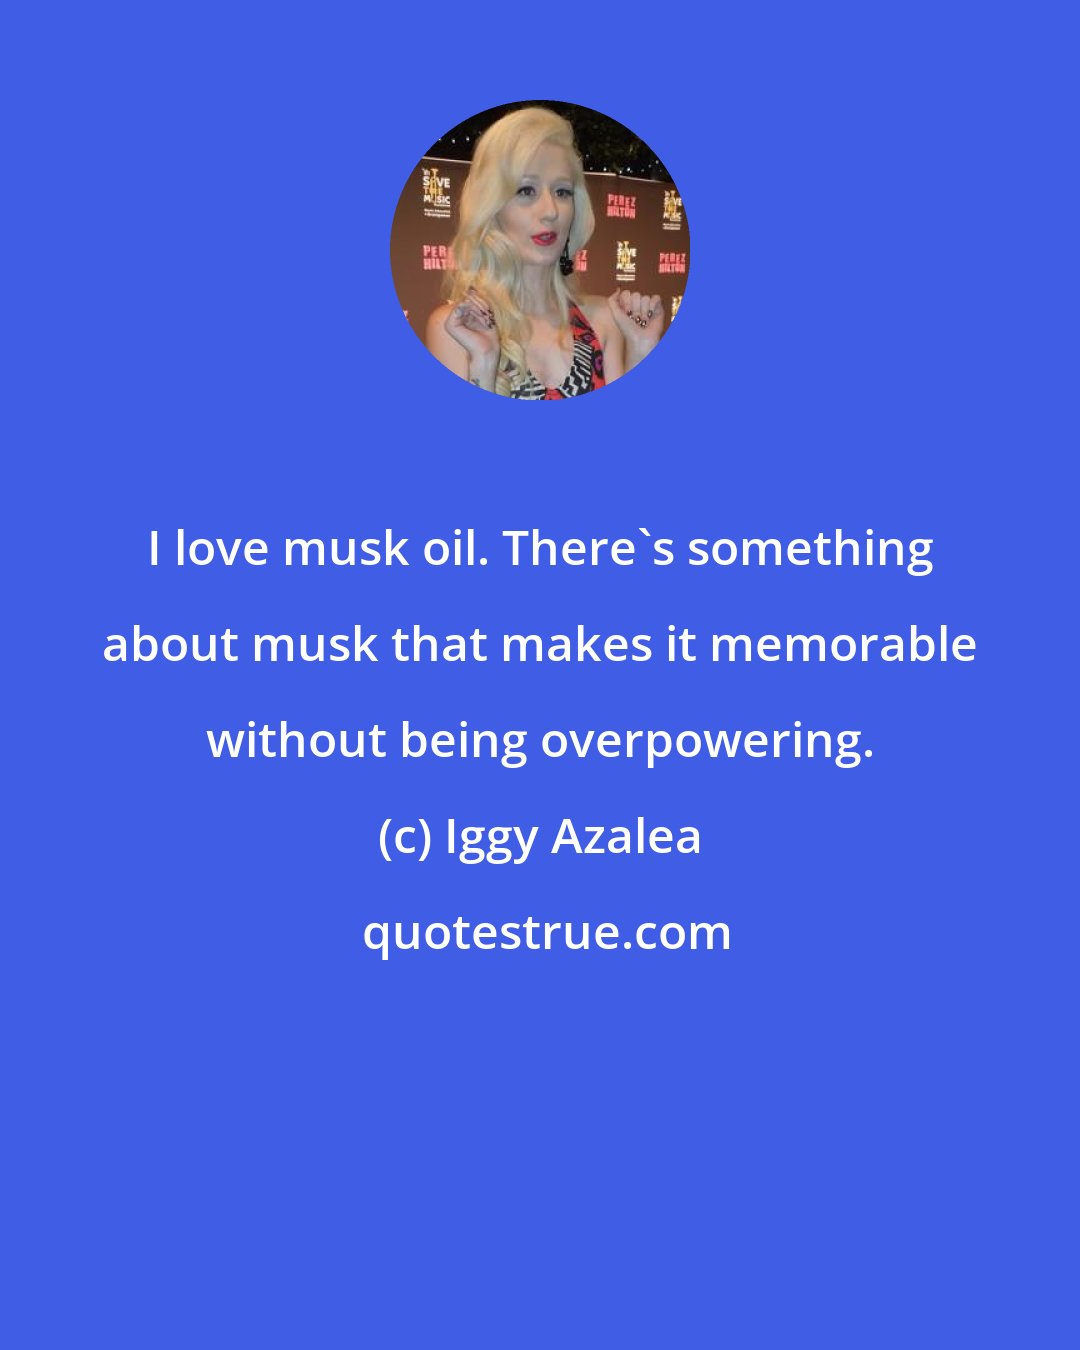 Iggy Azalea: I love musk oil. There's something about musk that makes it memorable without being overpowering.